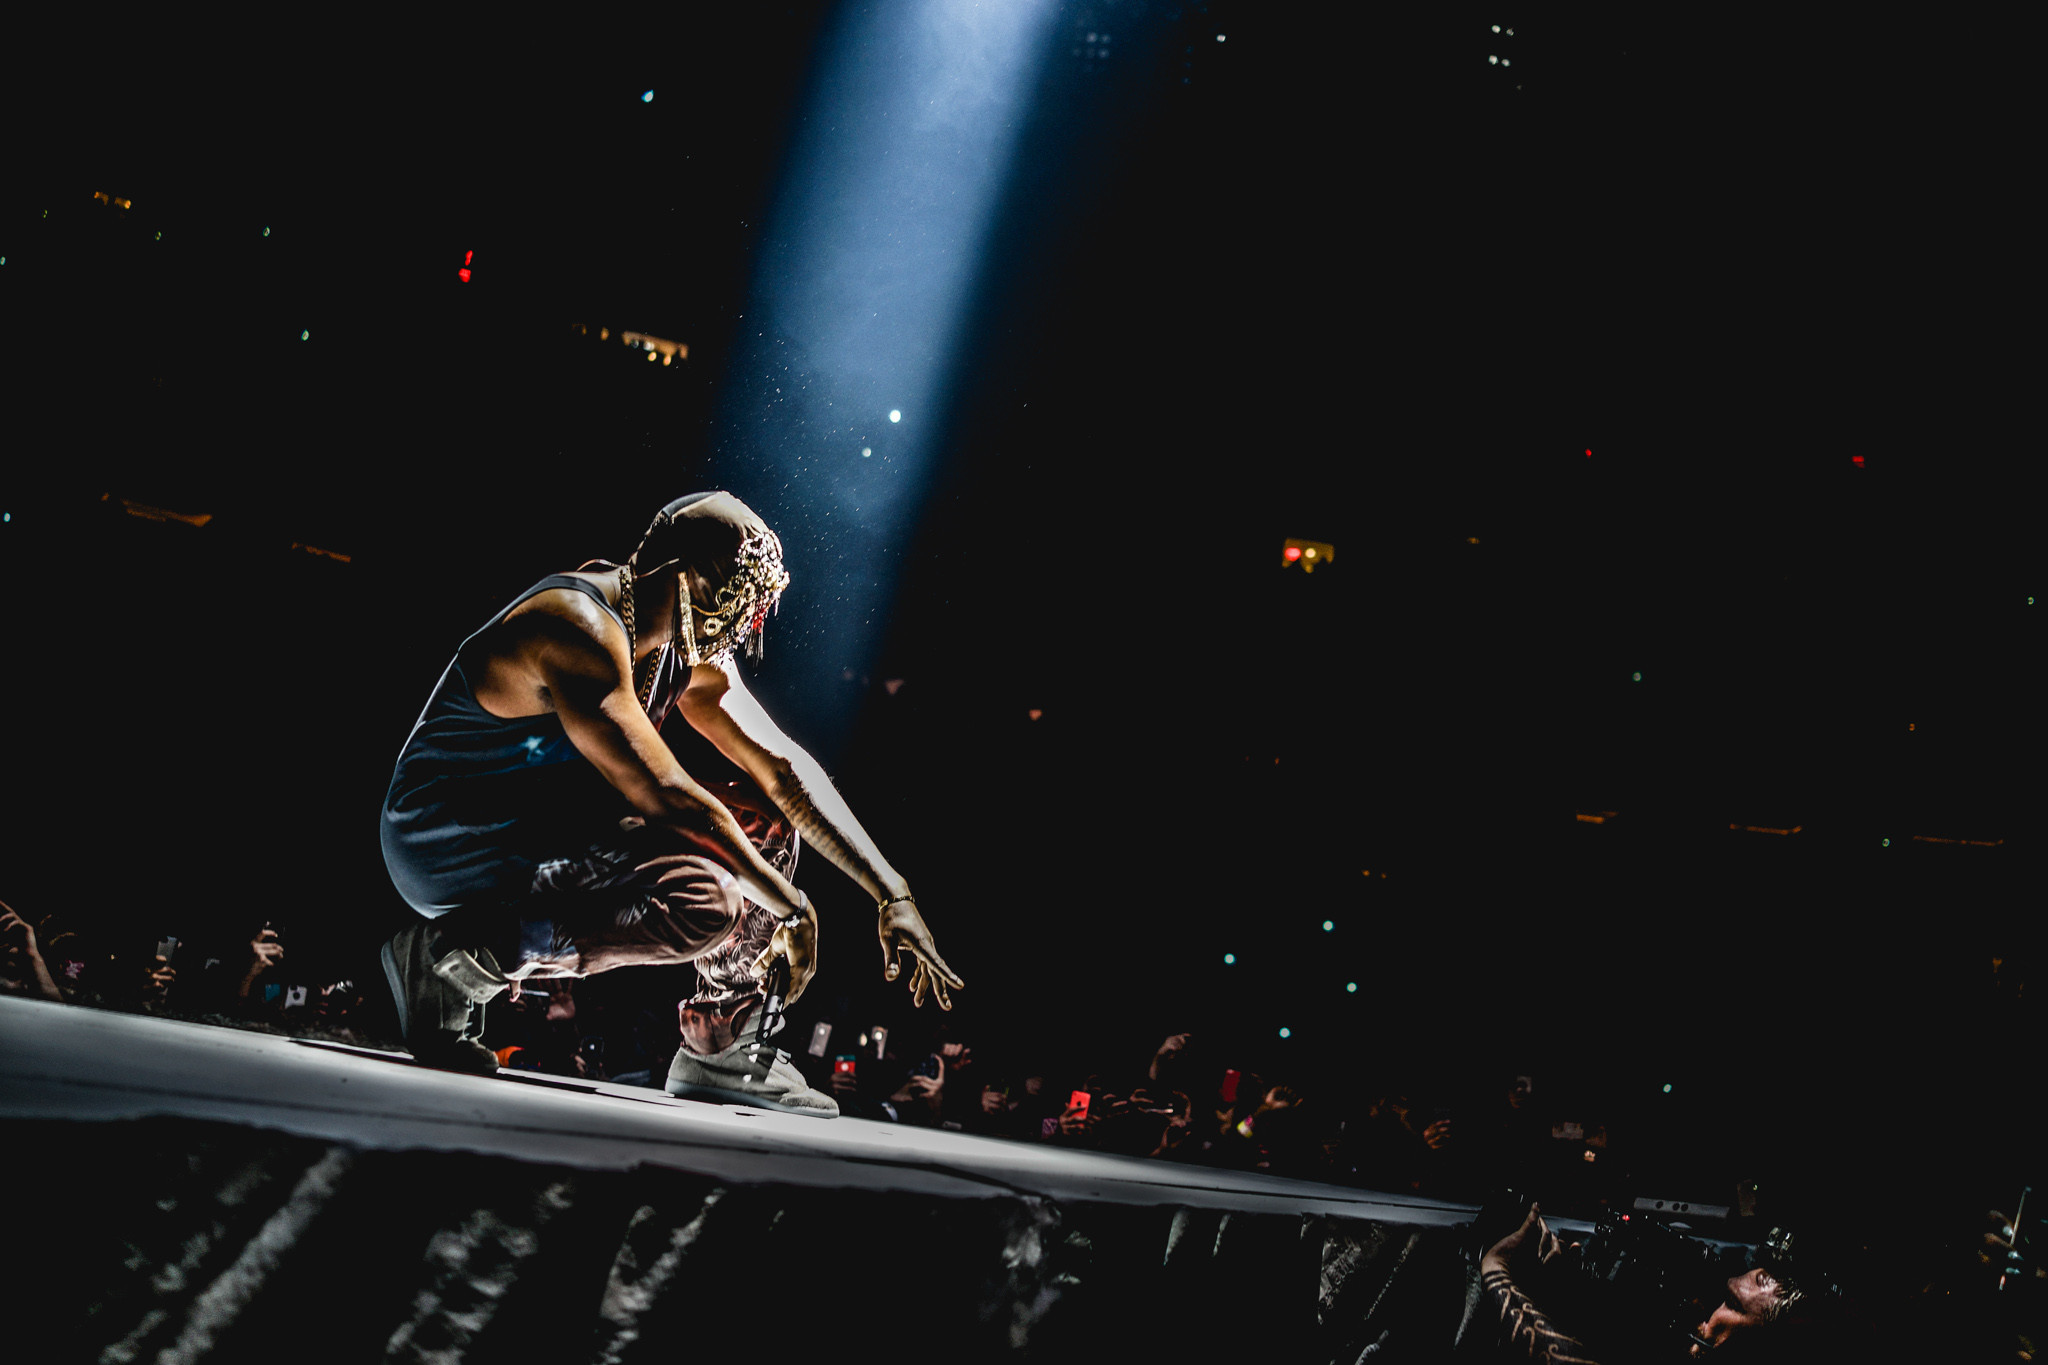 Hd Yeezus Tour Wallpapers [updated ] Â« Kanye West - Kanye West Yeezus Tour - HD Wallpaper 